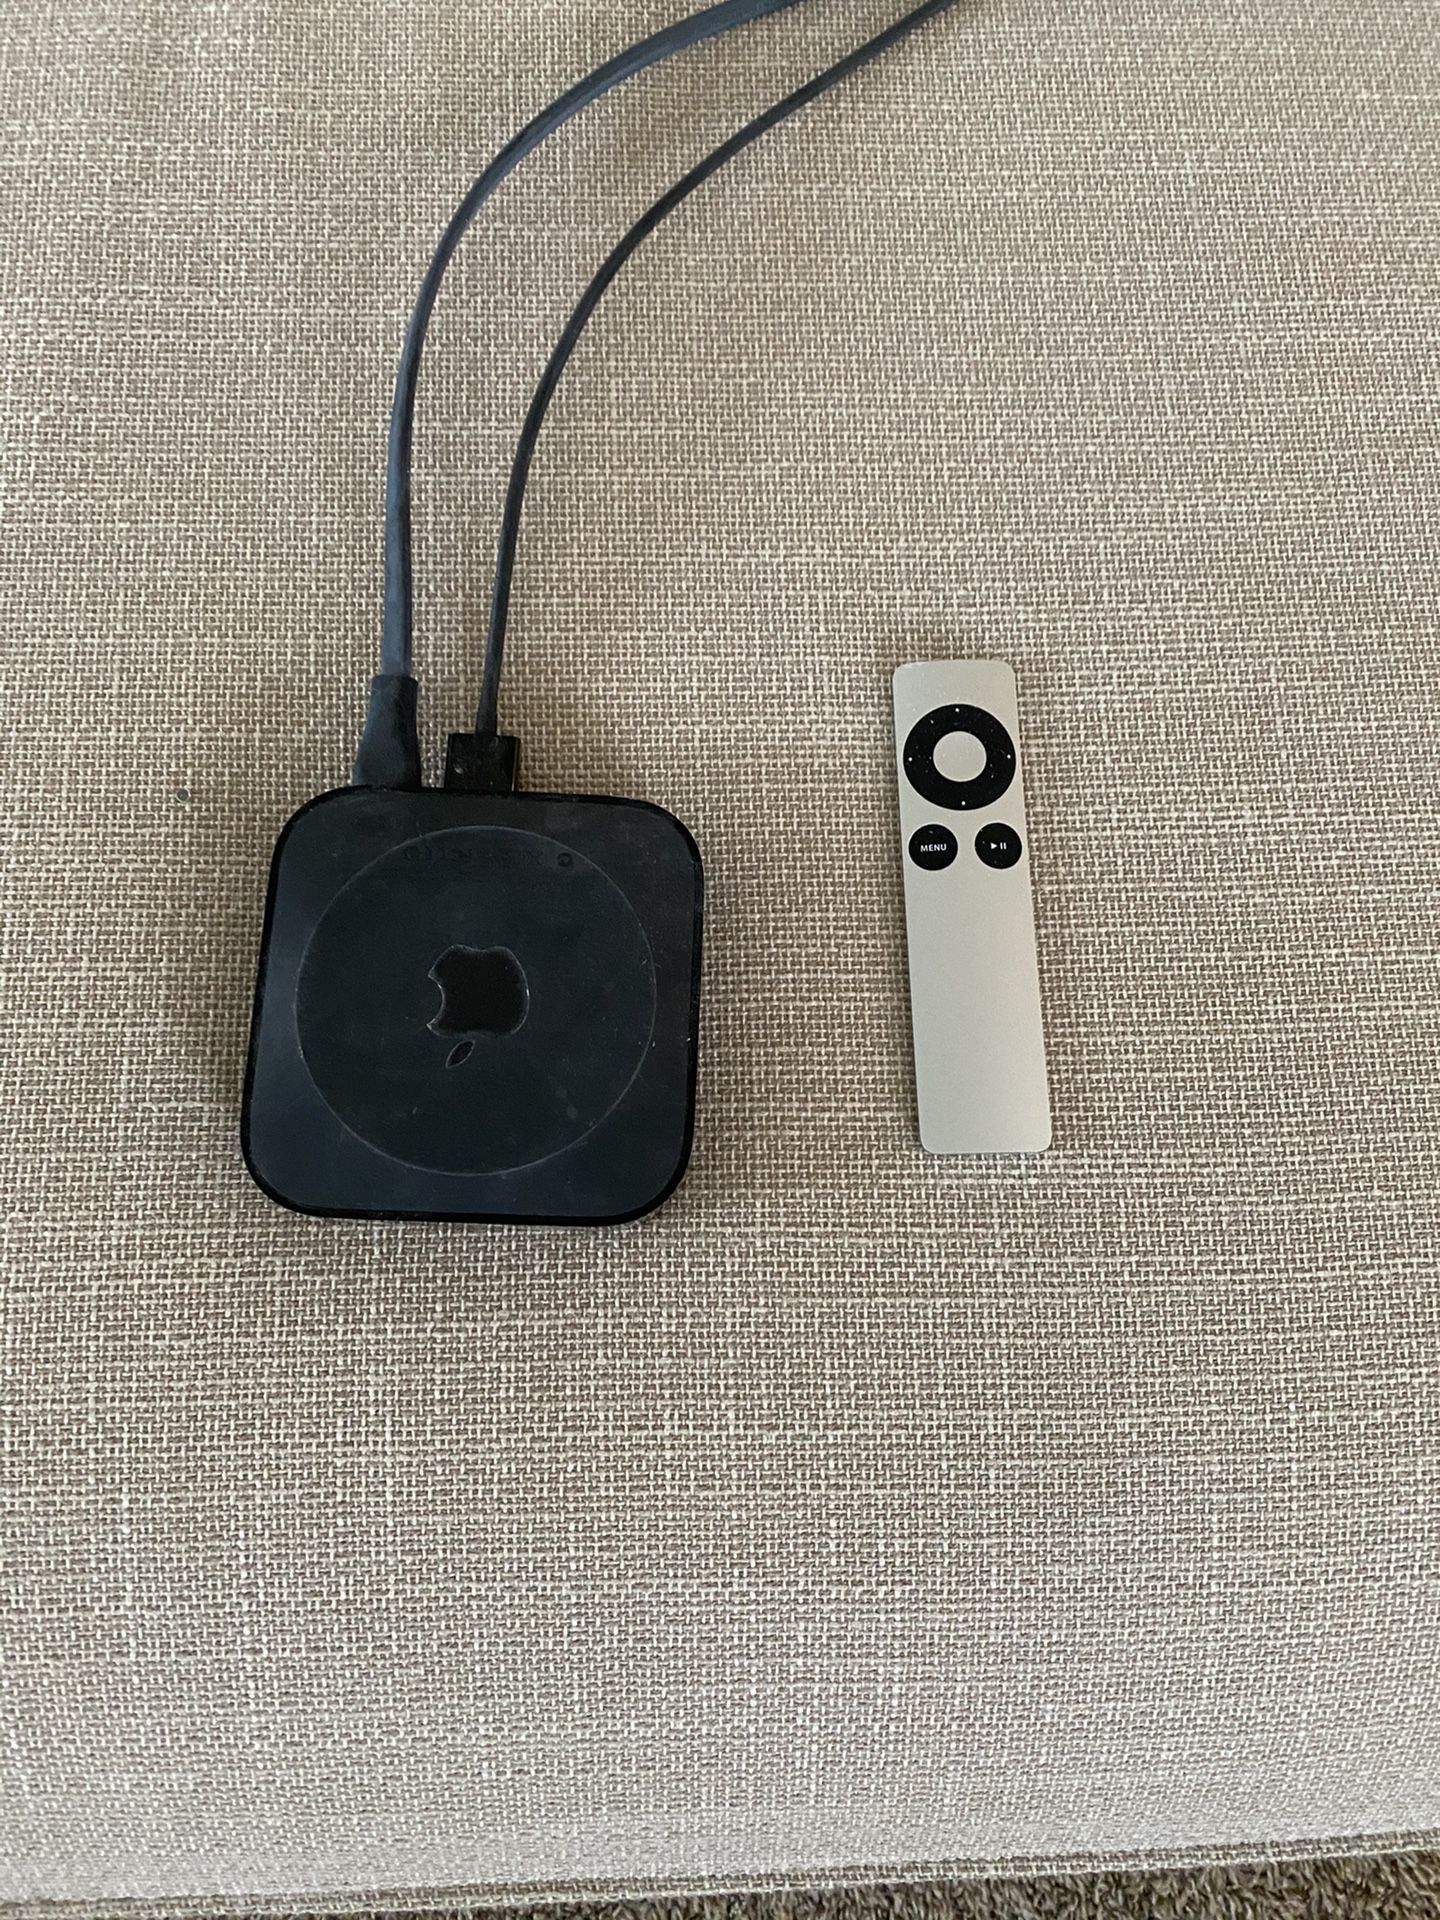 Apple TV. With remote